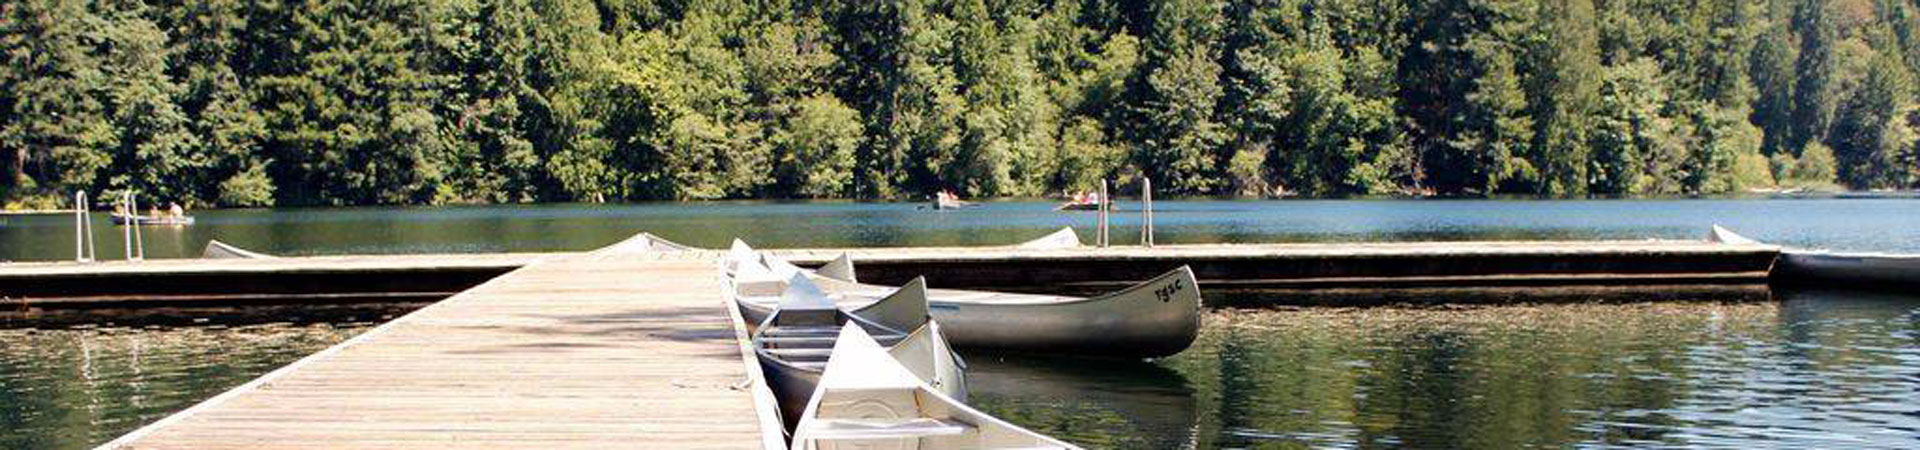  Image Description: A canoe next to a dock on a sunny lake with trees in the distance. 